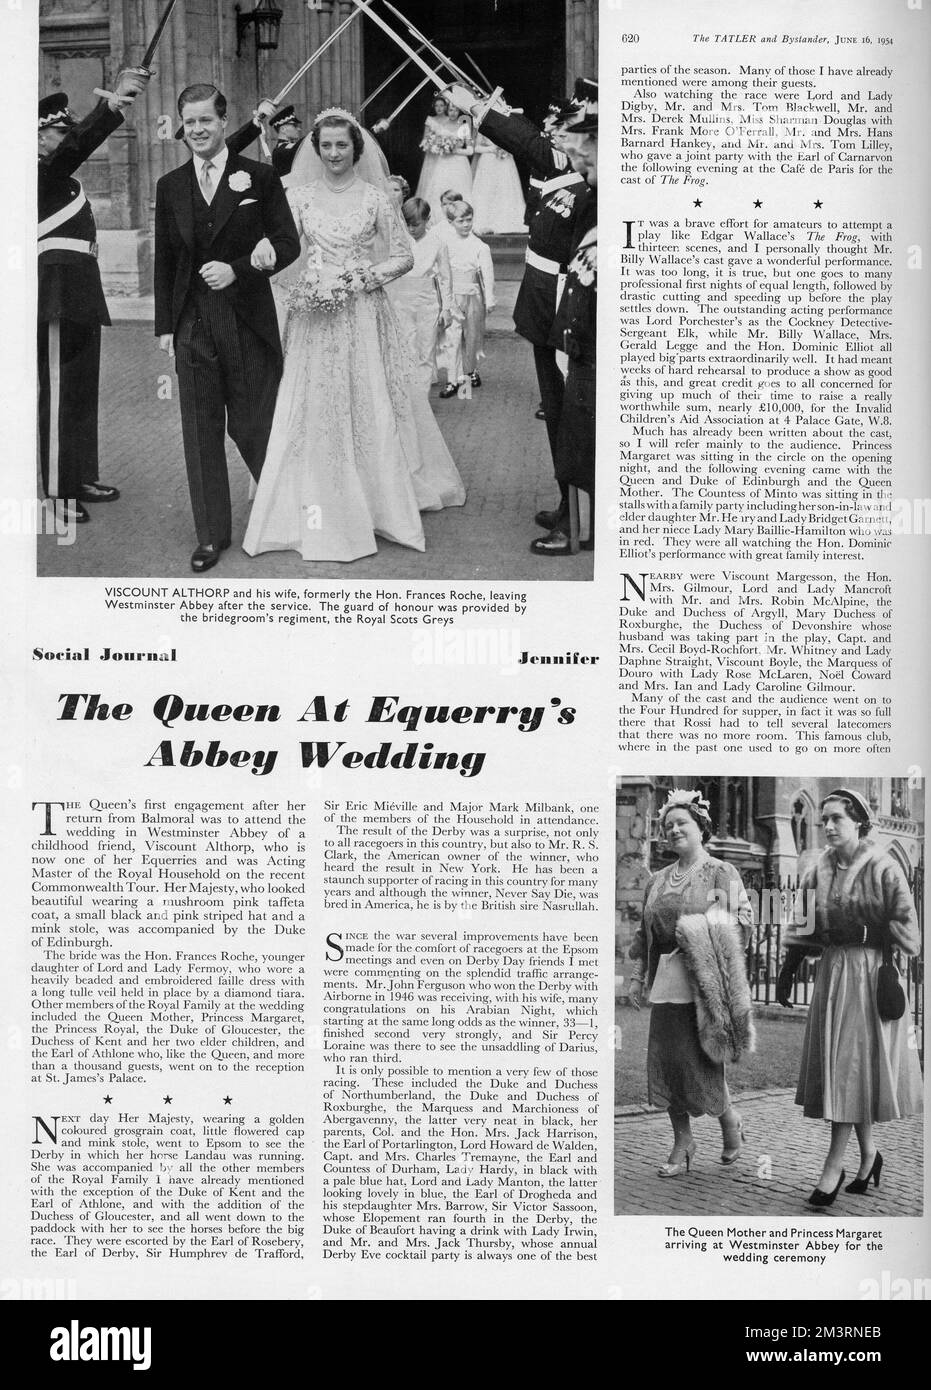 Page from The Tatler reporting on the wedding of Viscount Althorp (later Earl Spencer) and the Hon. Frances Roche, the parents of Diana, Princess of Wales, taking place at Westminster Abbey in June 1954.  The wedding was attended by the Queen and other members of the royal family - the Queen Mother and Princess Margaret can be seen in the bottom right photograph.    1954 Stock Photo